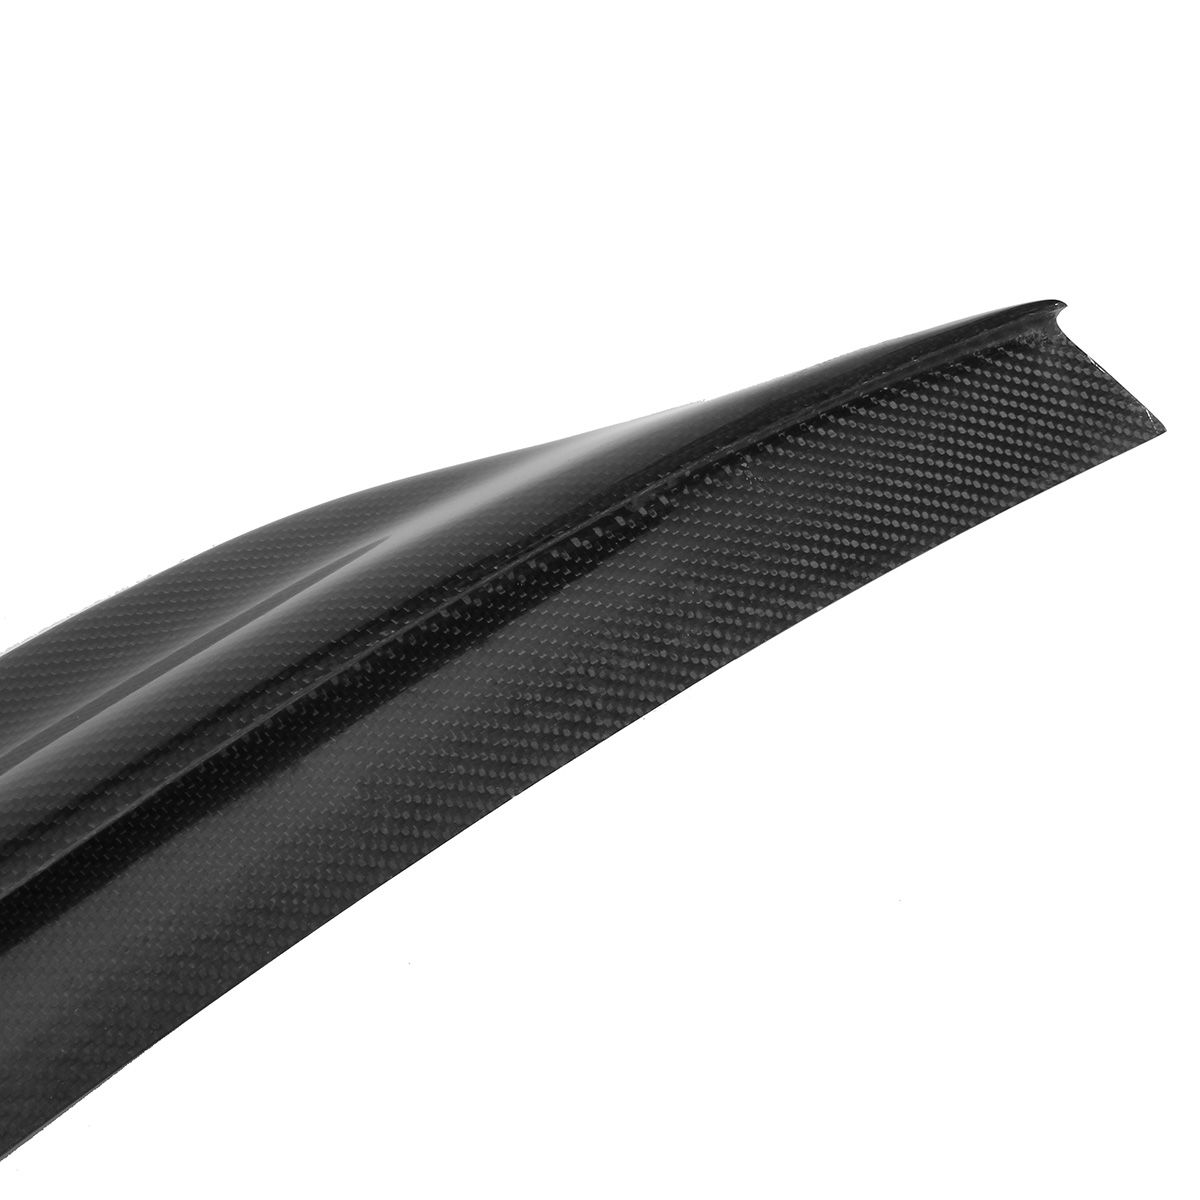 Real-Carbon-Fiber-Trunk-Spoiler-Lid-Wing-For-Audi-S5-RS5-Coupe-A5-Sedan-CAT-Style-2009-2016-1695713